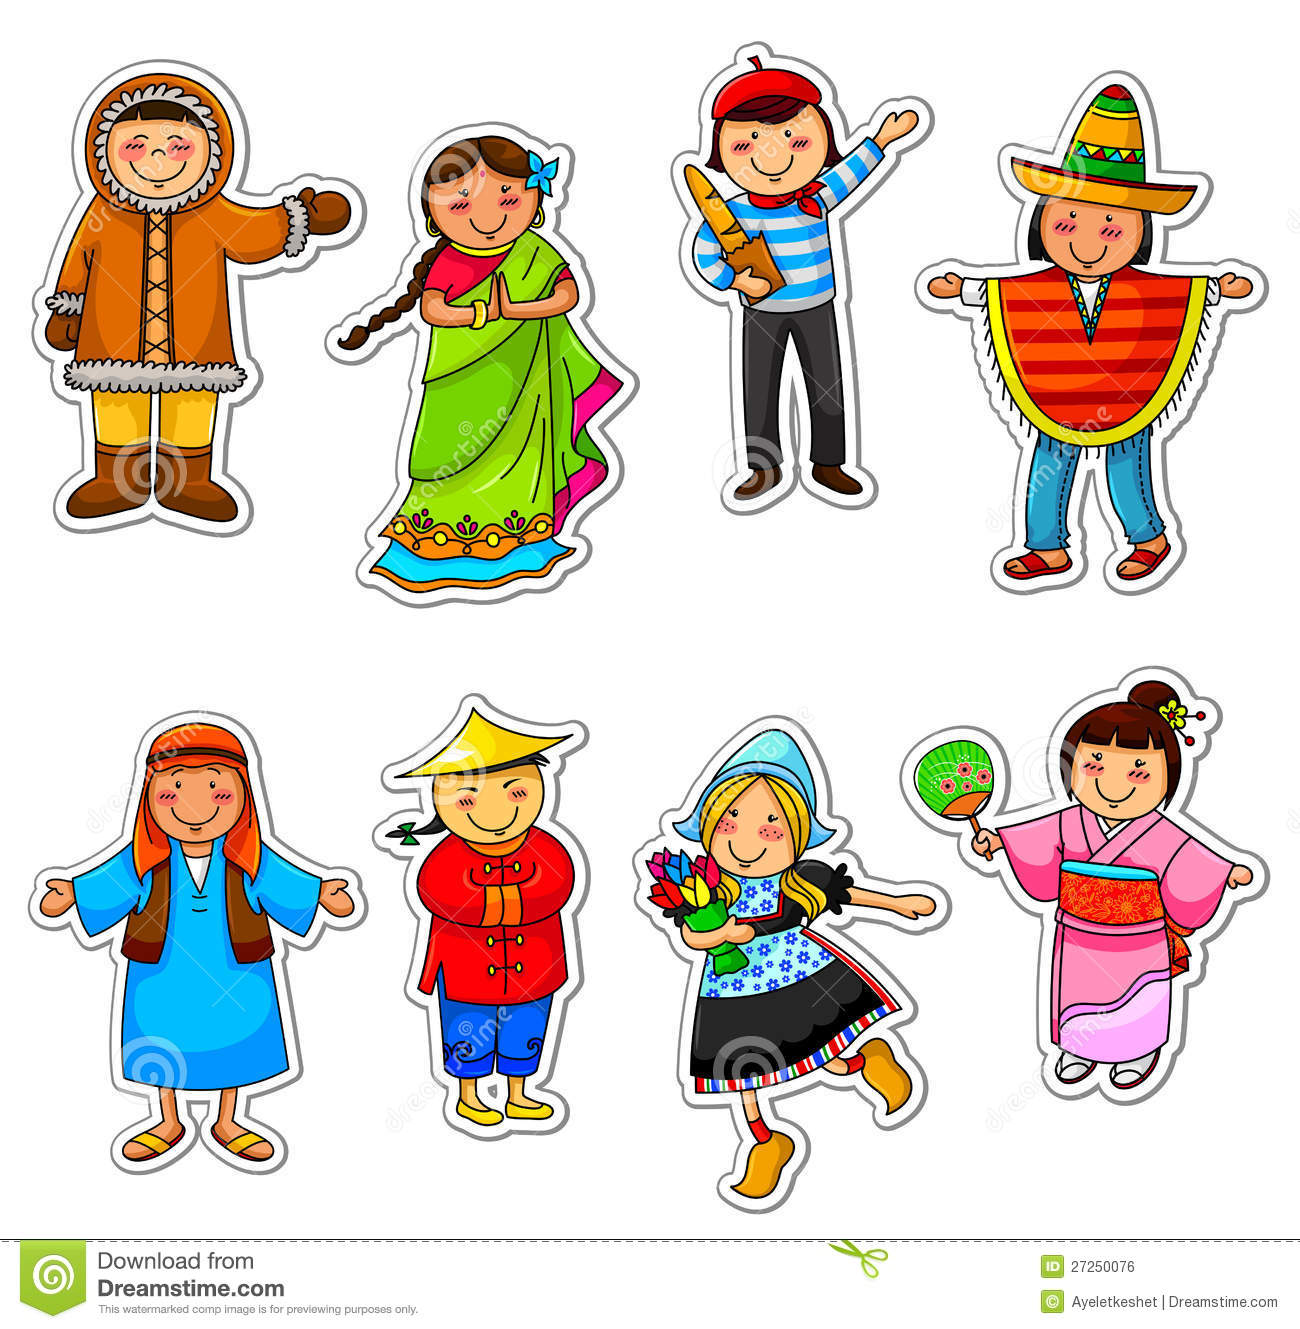 Kids From Around The World Royalty Free Stock Image   Image  27250076